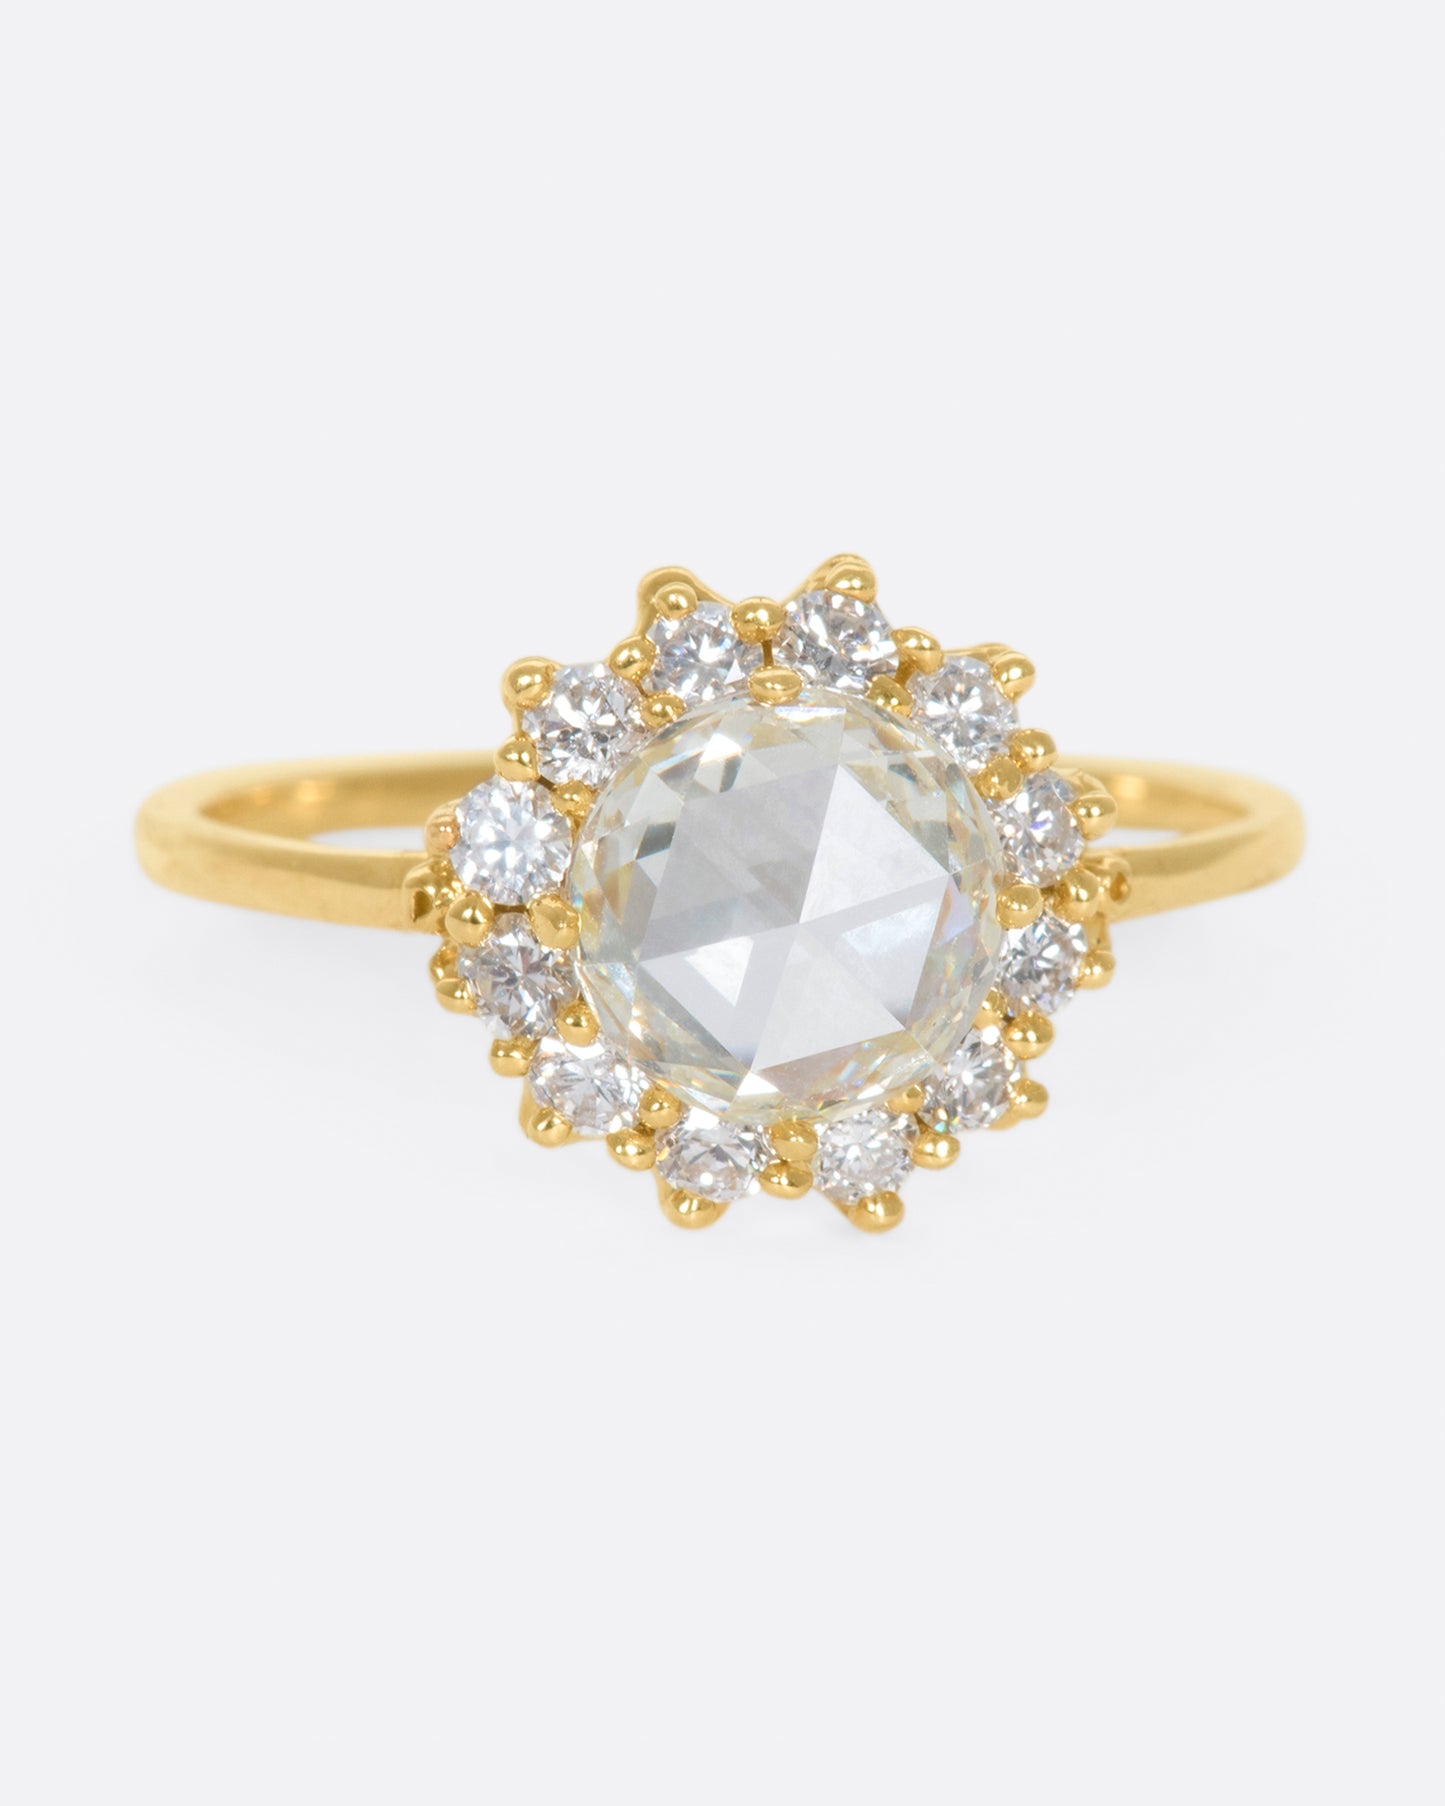 This light champagne, rose cut diamond is surrounded by a diamond halo, giving it the illusion of a shining sun.